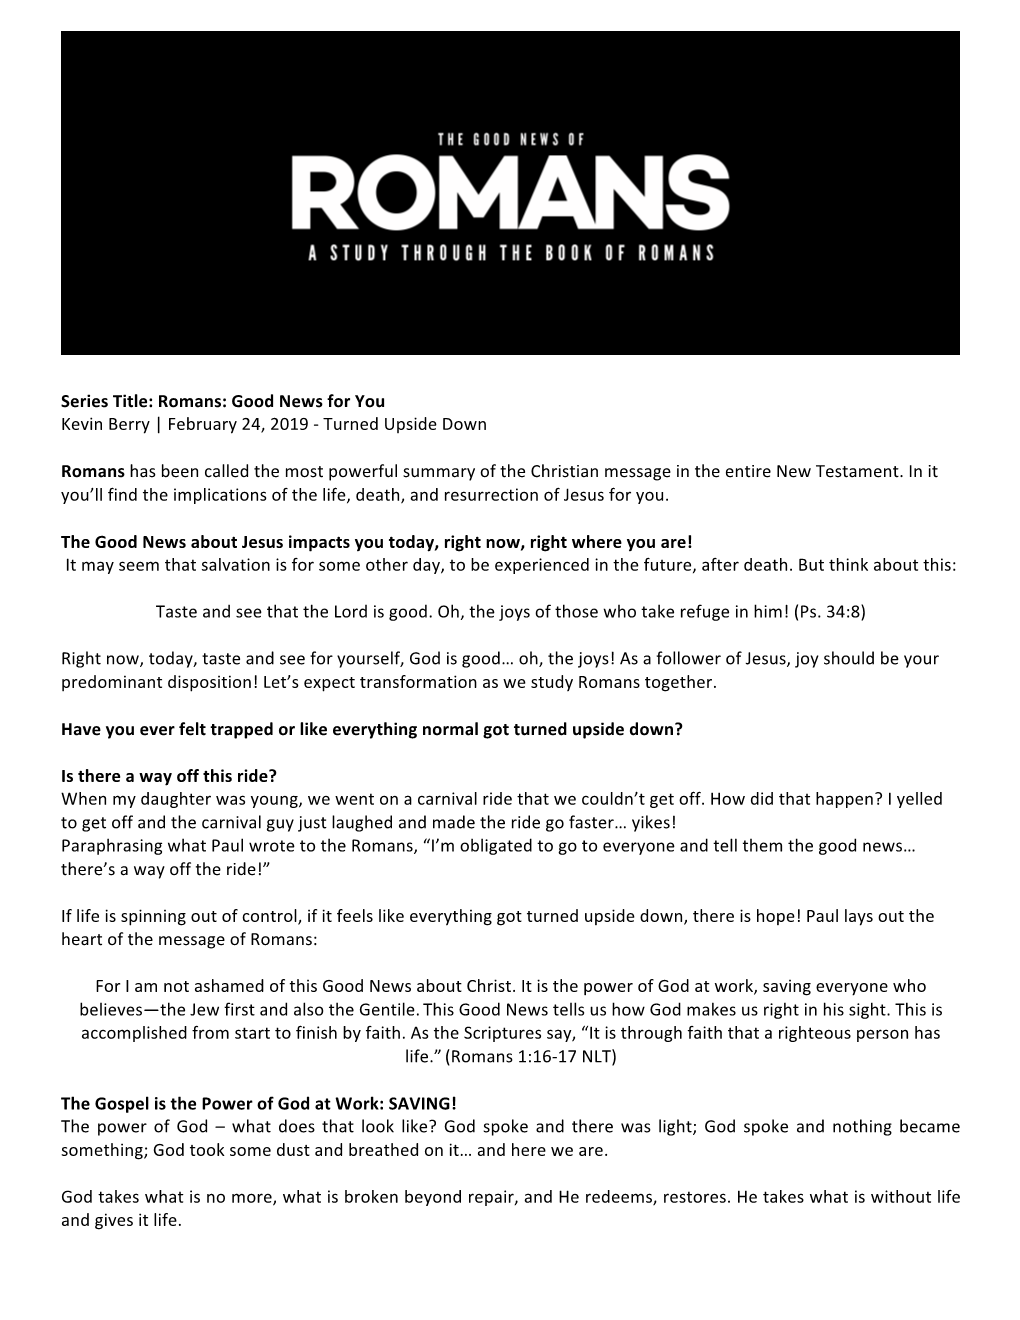 Romans: Good News for You Kevin Berry | February 24, 2019 - Turned Upside Down